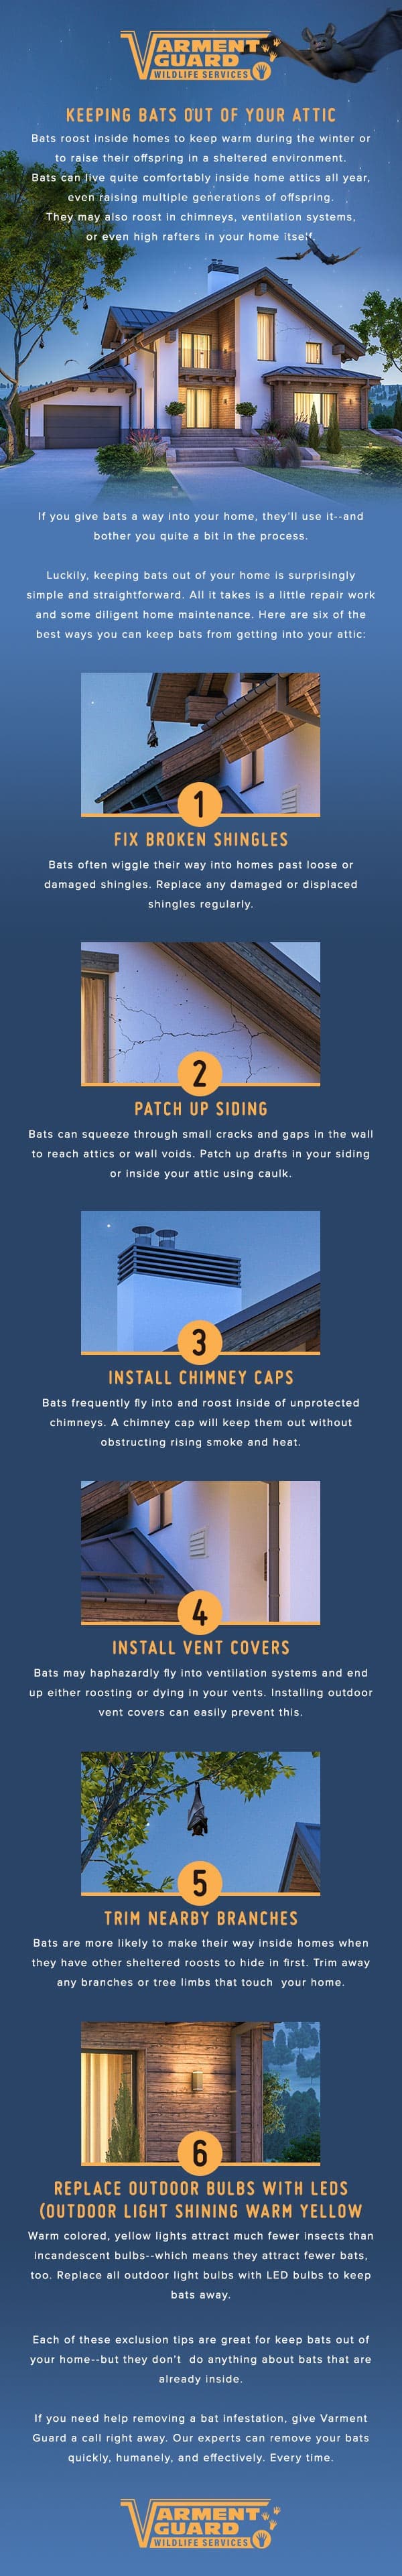 How to keep bats out of your attic